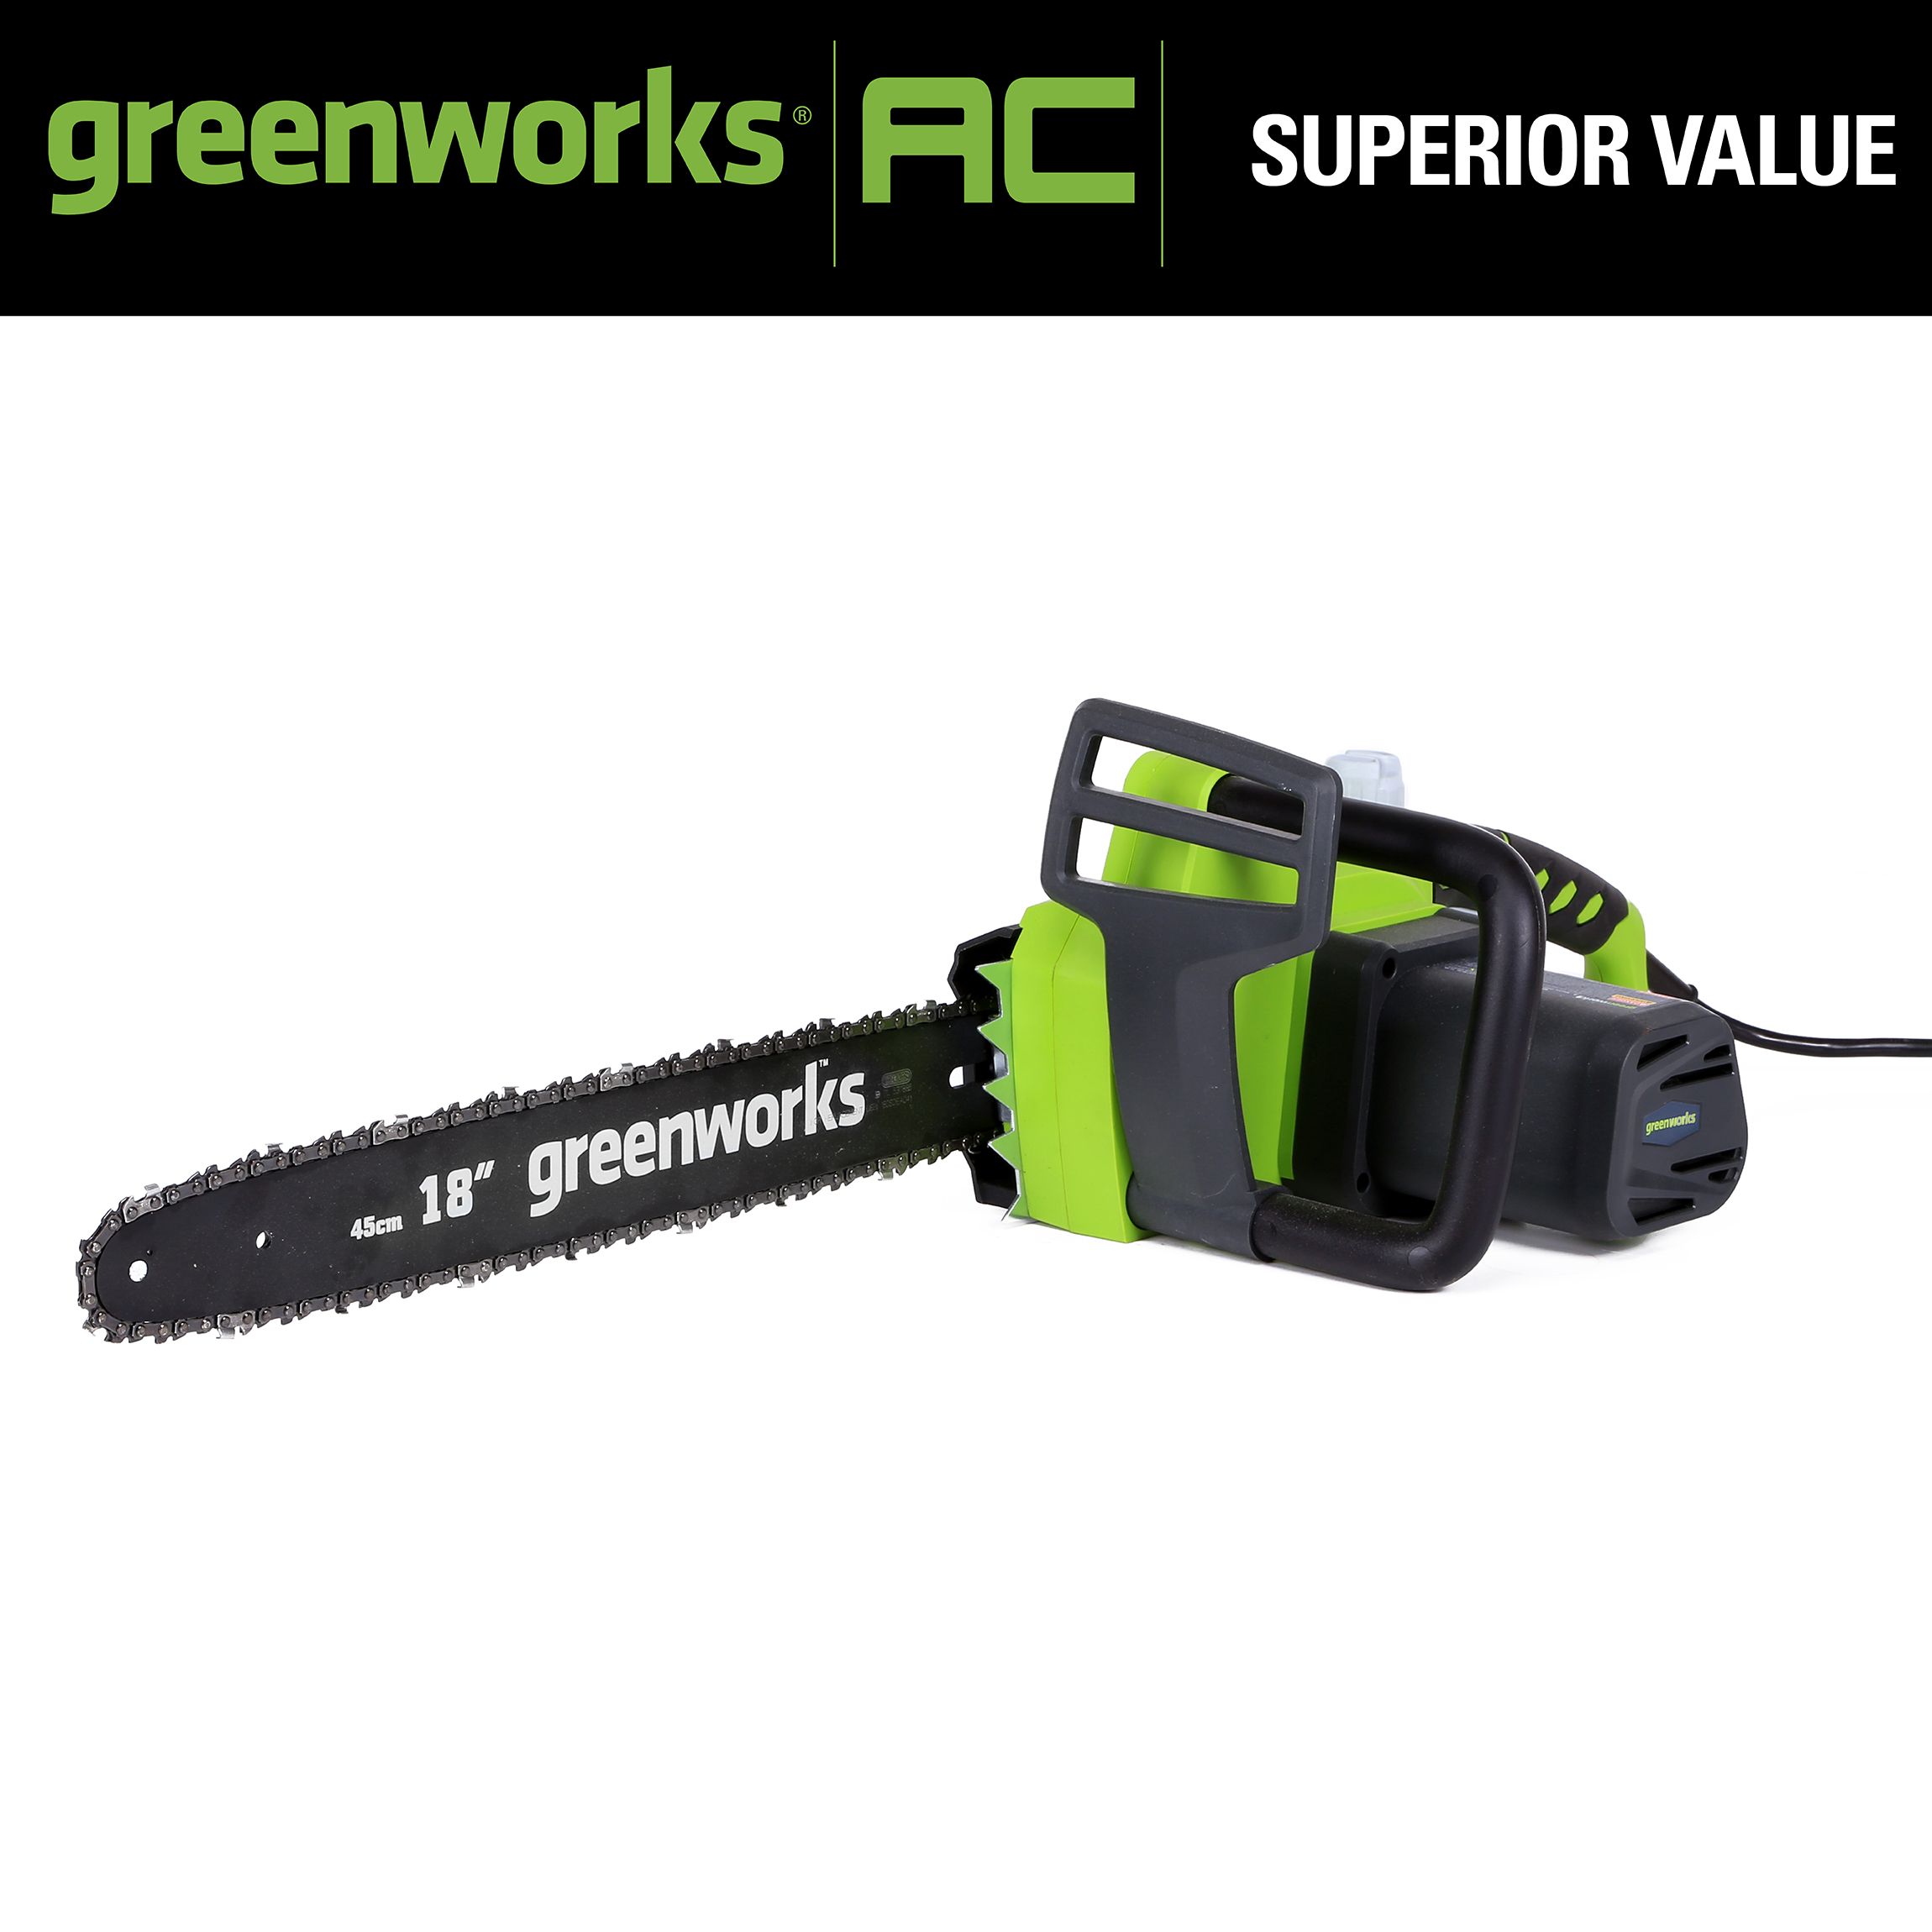 Greenworks 14.5 Amp 18" Corded Electric Chainsaw 20332 - image 4 of 14